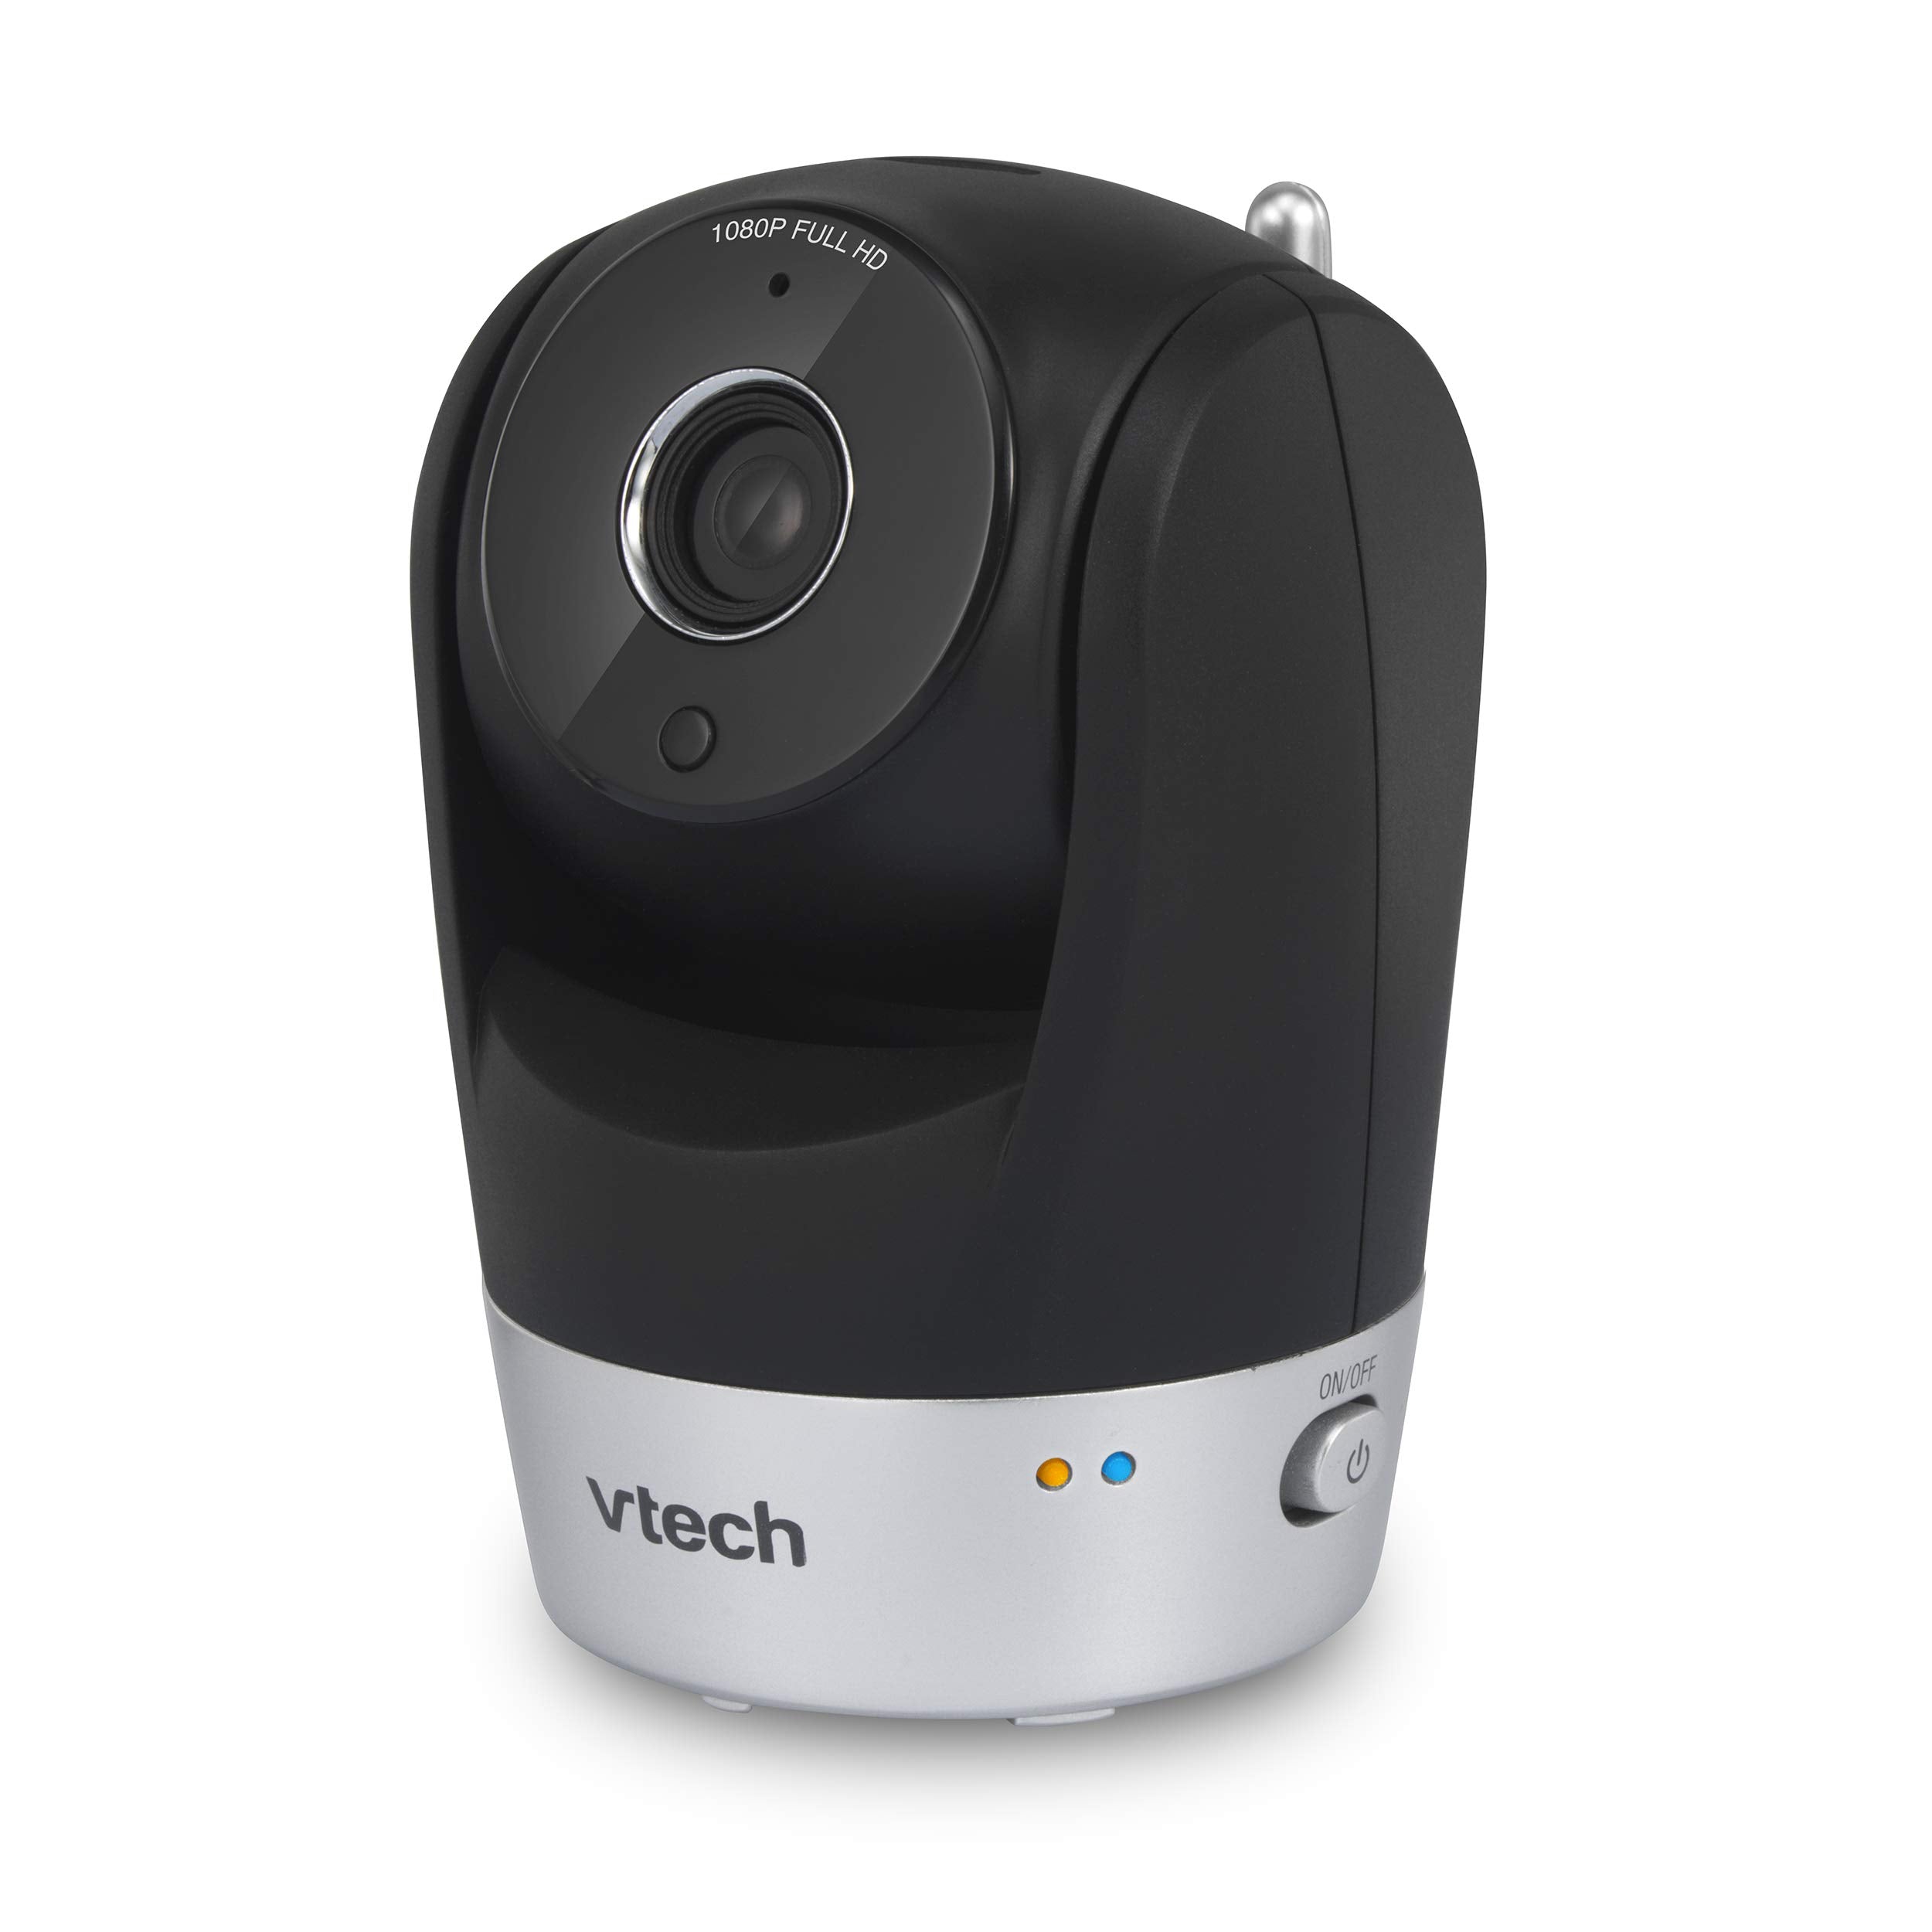 VTech VC9511 Wi-Fi IP Camera with 1080p Full HD, Remote Pan and Tilt, Fr